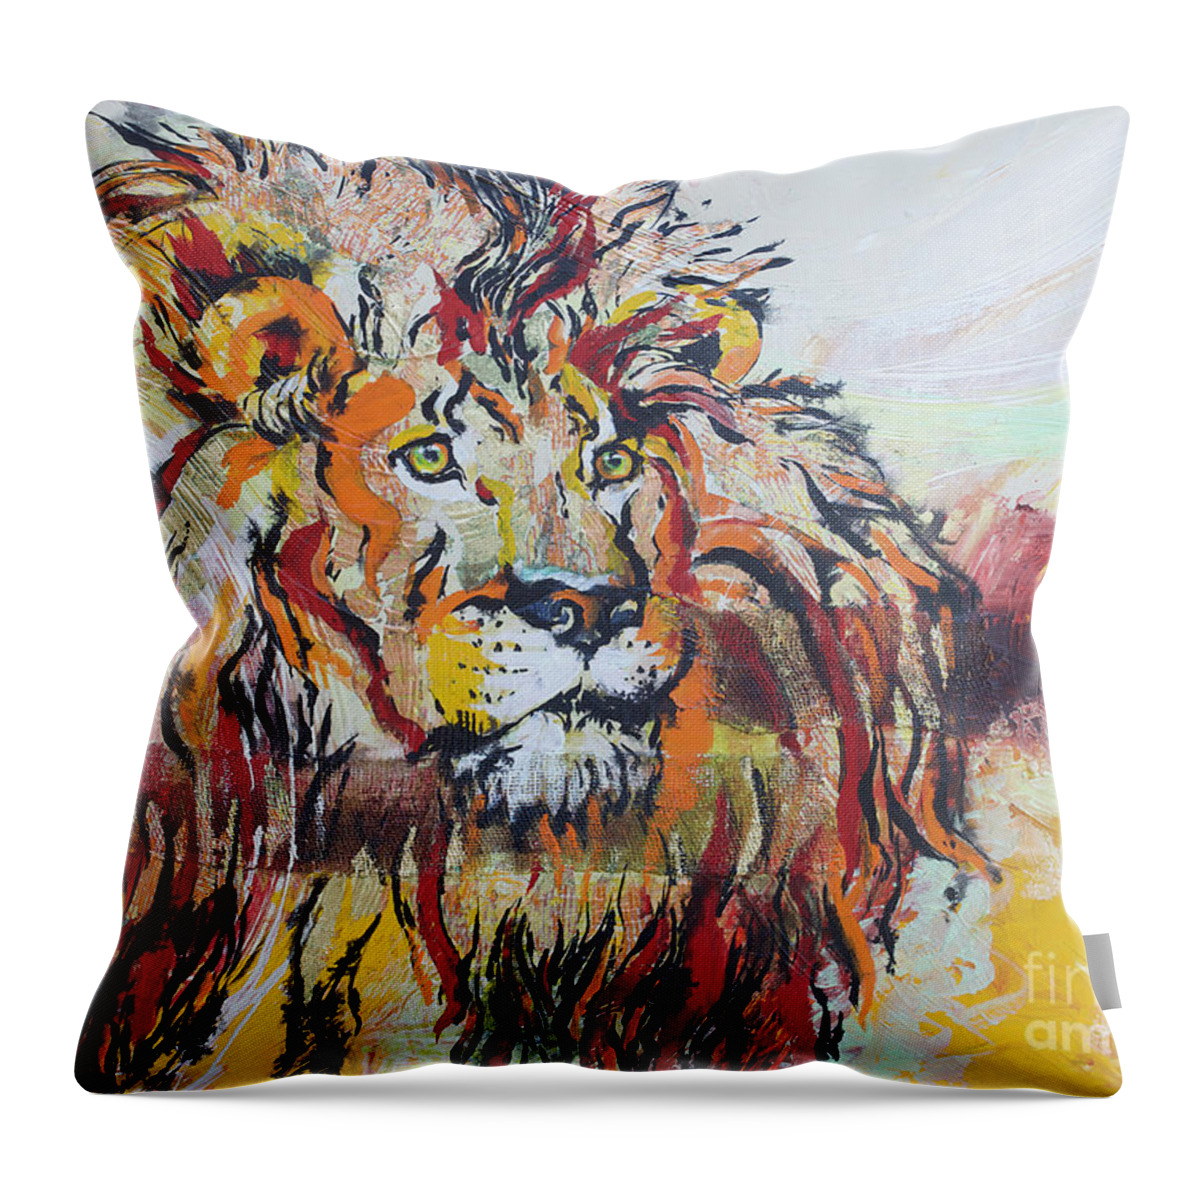 Lion Throw Pillow featuring the painting The King by Jyotika Shroff